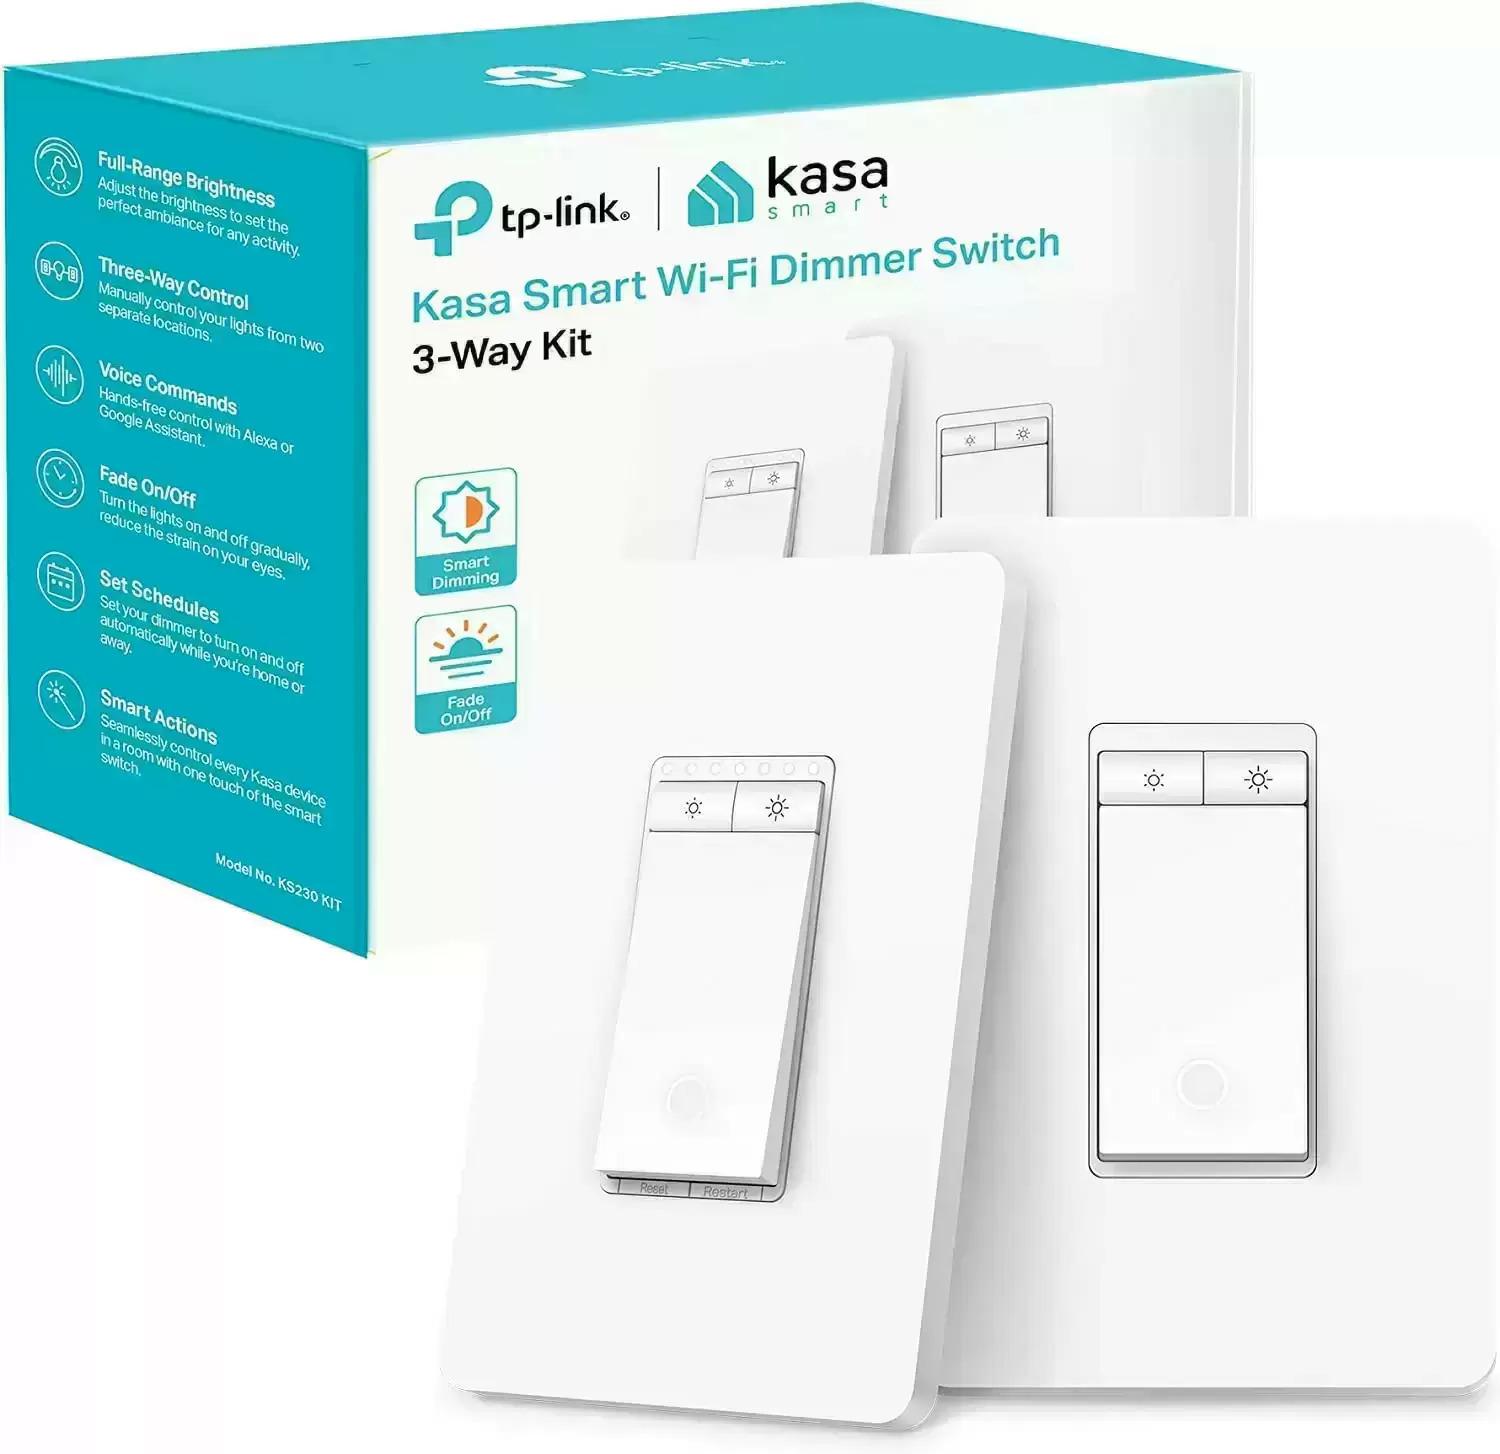 TP-Link Kasa Smart Wi-Fi 3-Way Dimmer Light Switch Kit for $32.74 Shipped